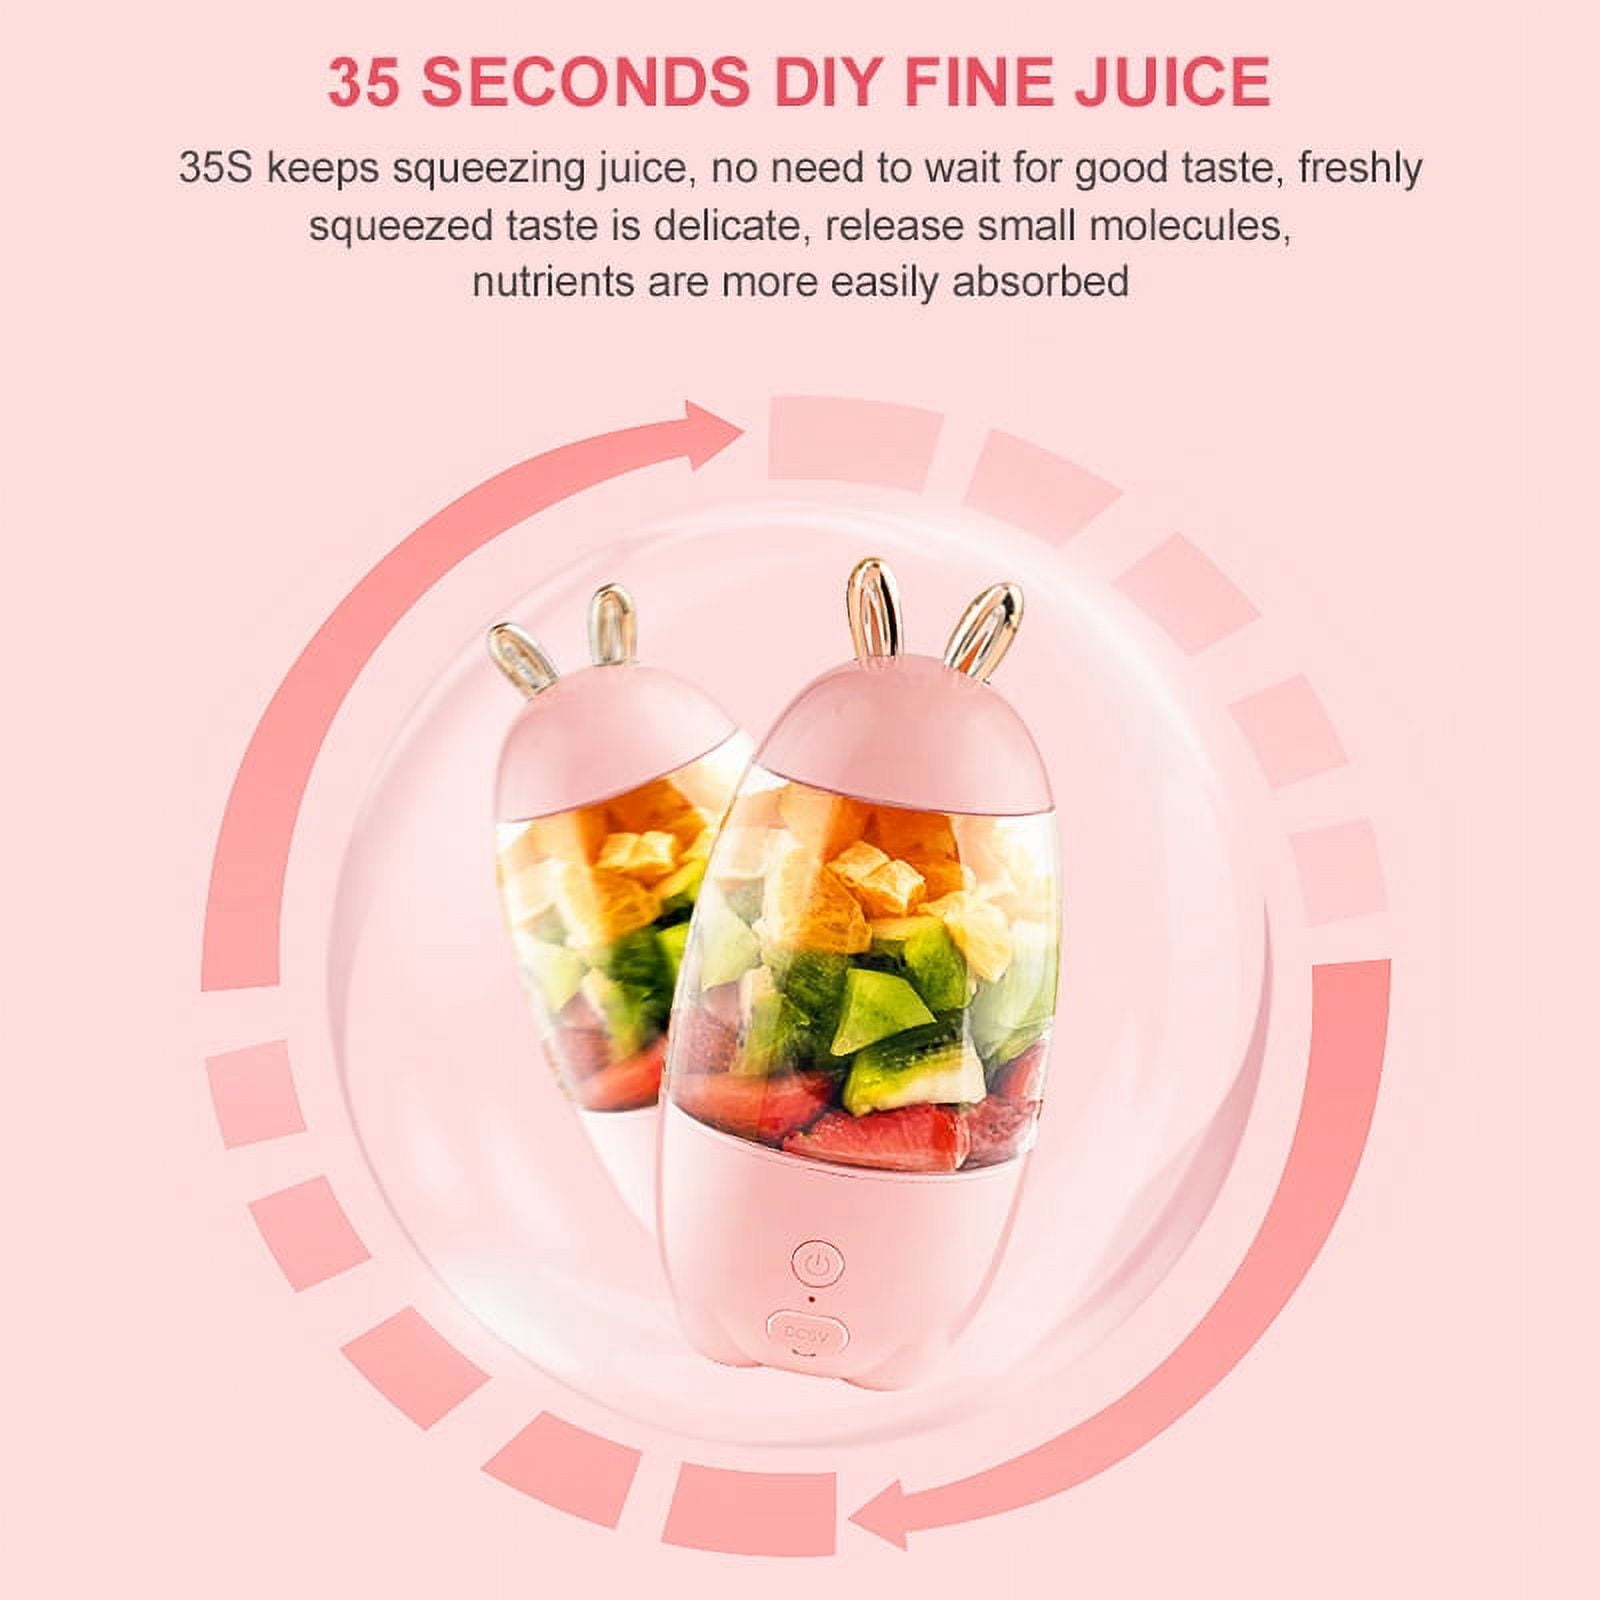 1pc Electric Portable 4-in-1 Function 2 Speed Settings Handheld Blender,  Juicer, Baby Food Making, Smoothie Maker Hb-4602, Suitable For Home Kitchen  Use